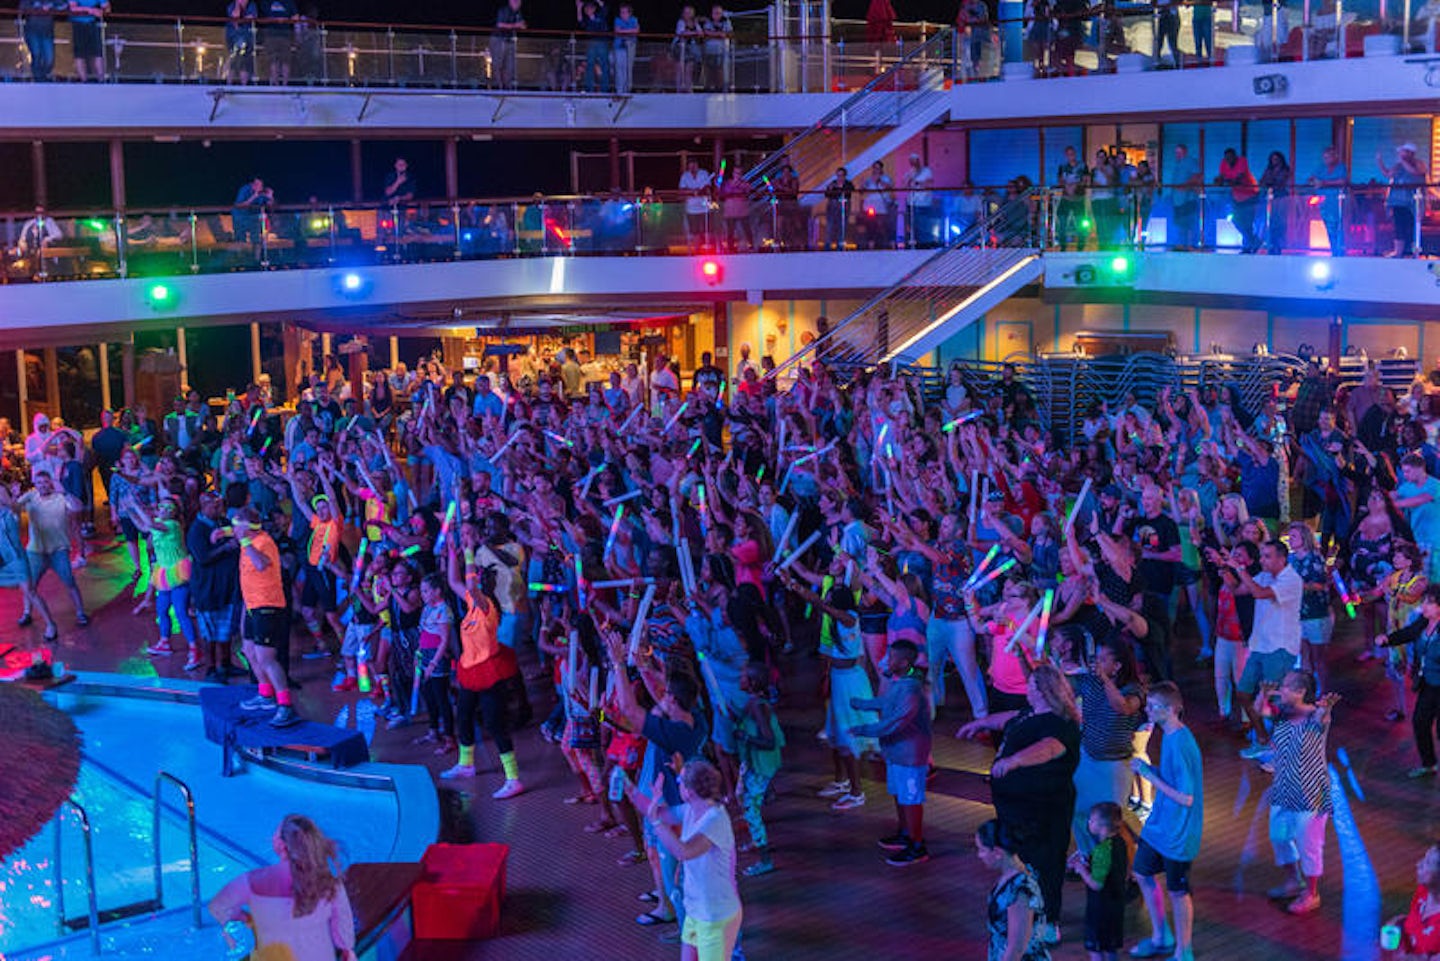 80s Rock and Glow Party on Carnival Horizon